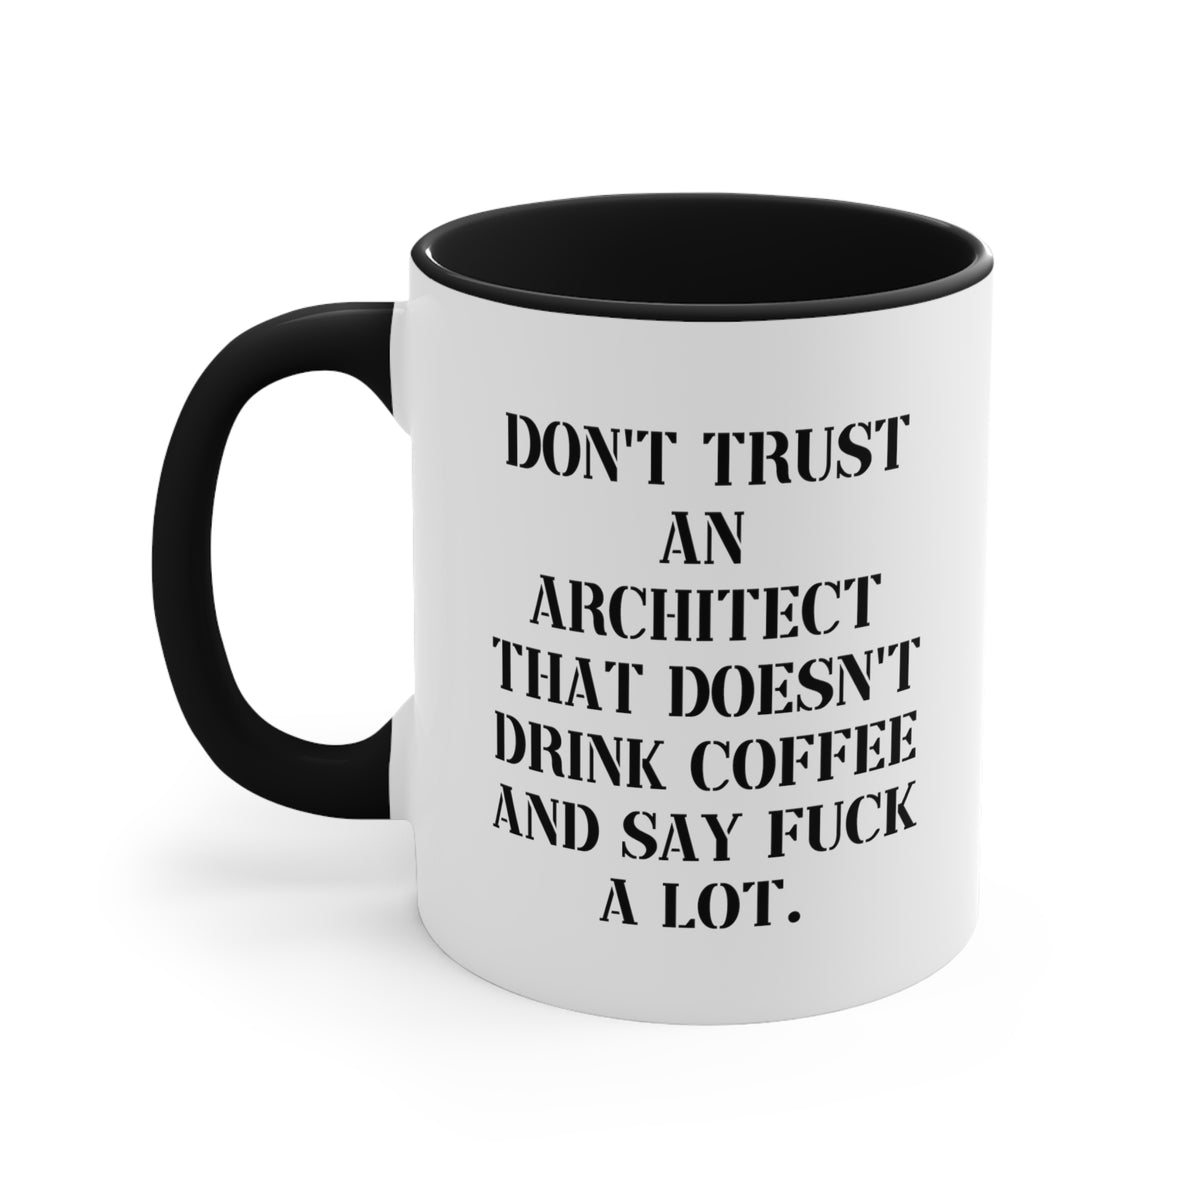 Don't Trust an Architect That Doesn't Drink Coffee and Say Fuck a Lot. Two Tone 11oz Mug, Architect Present From Boss, New Cup For Men Women